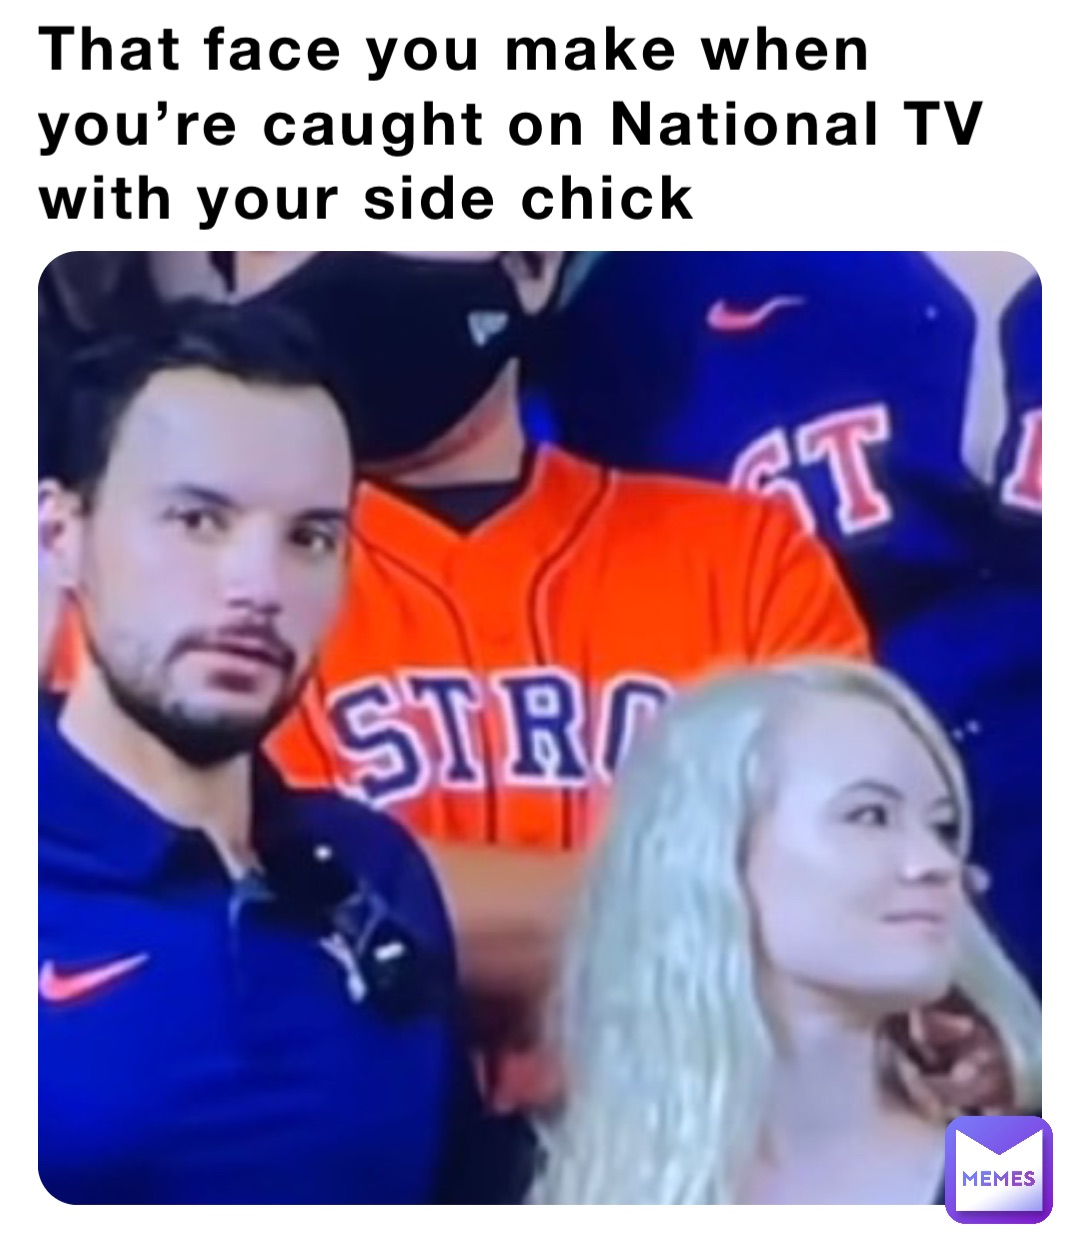 That face you make when you’re caught on National TV with your side chick